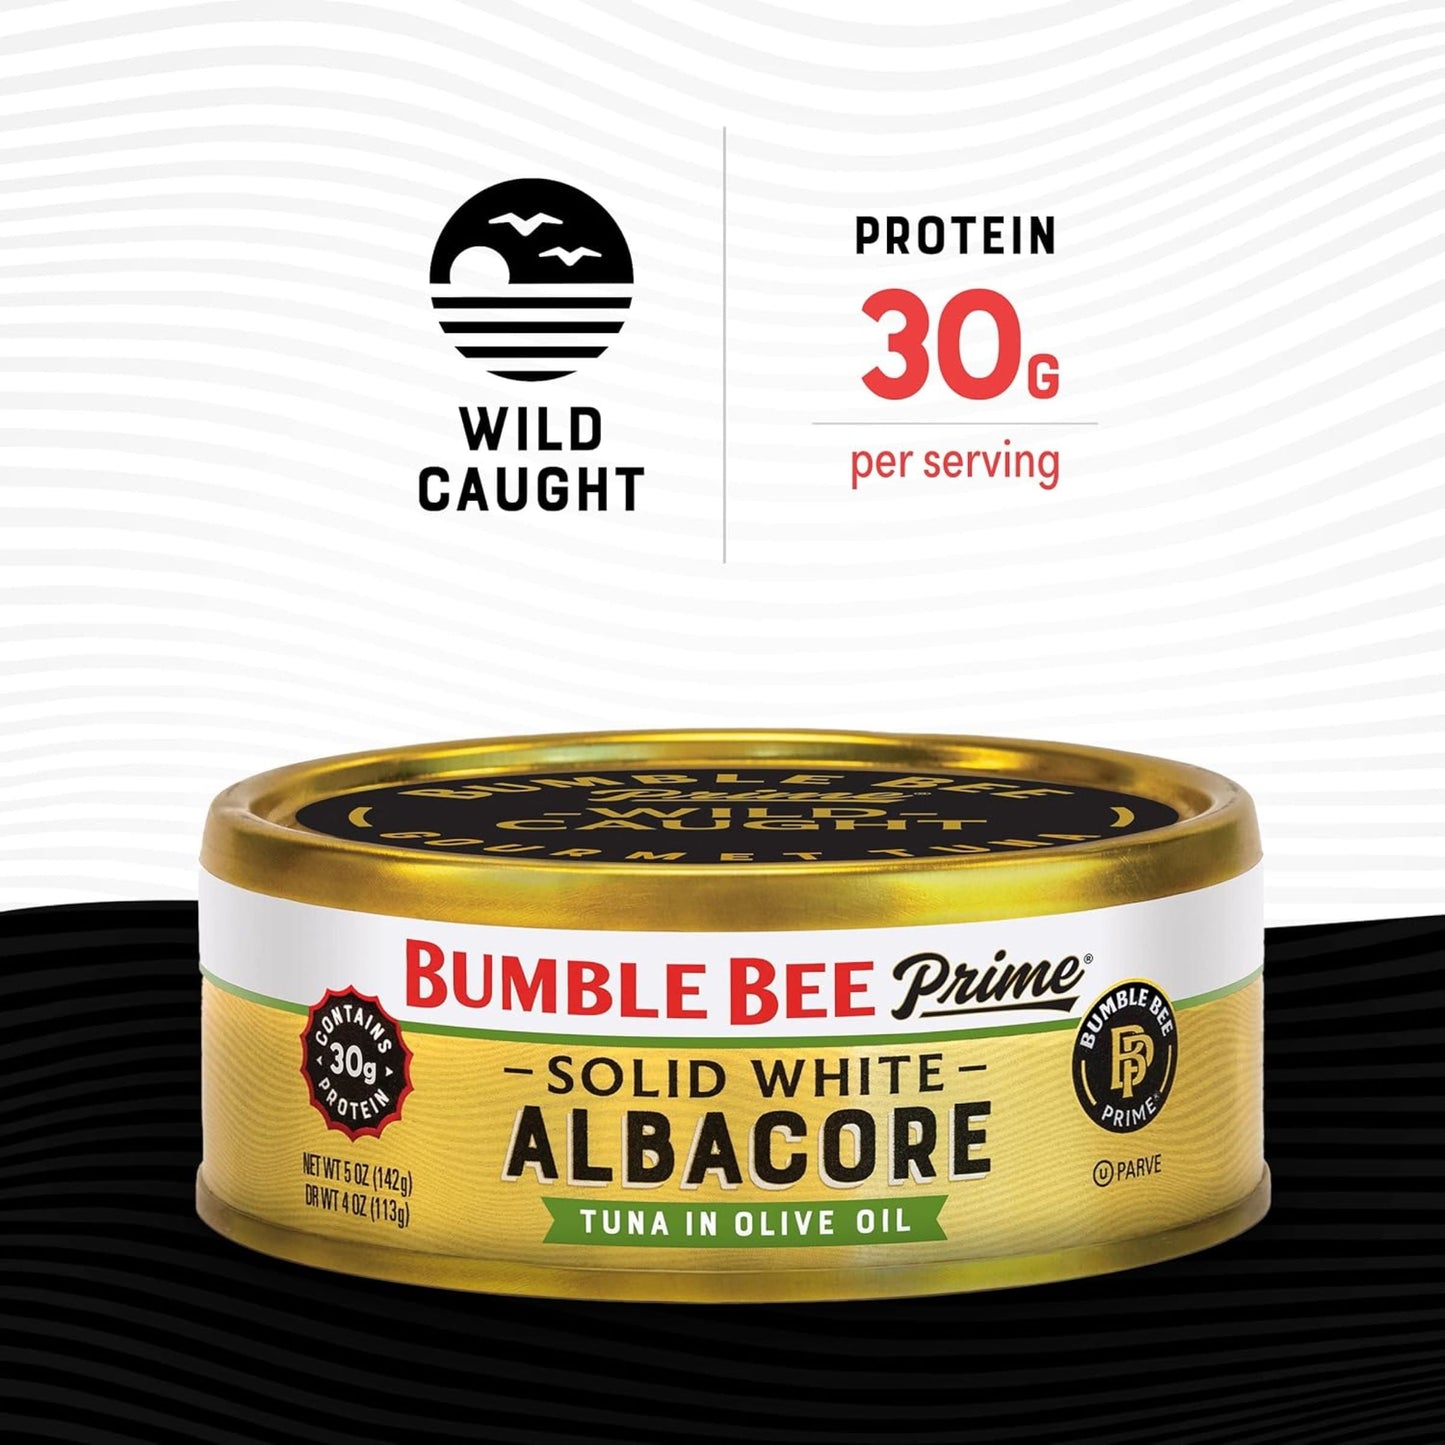 Prime Solid White Canned Albacore Tuna in Olive Oil, 5 Oz Can